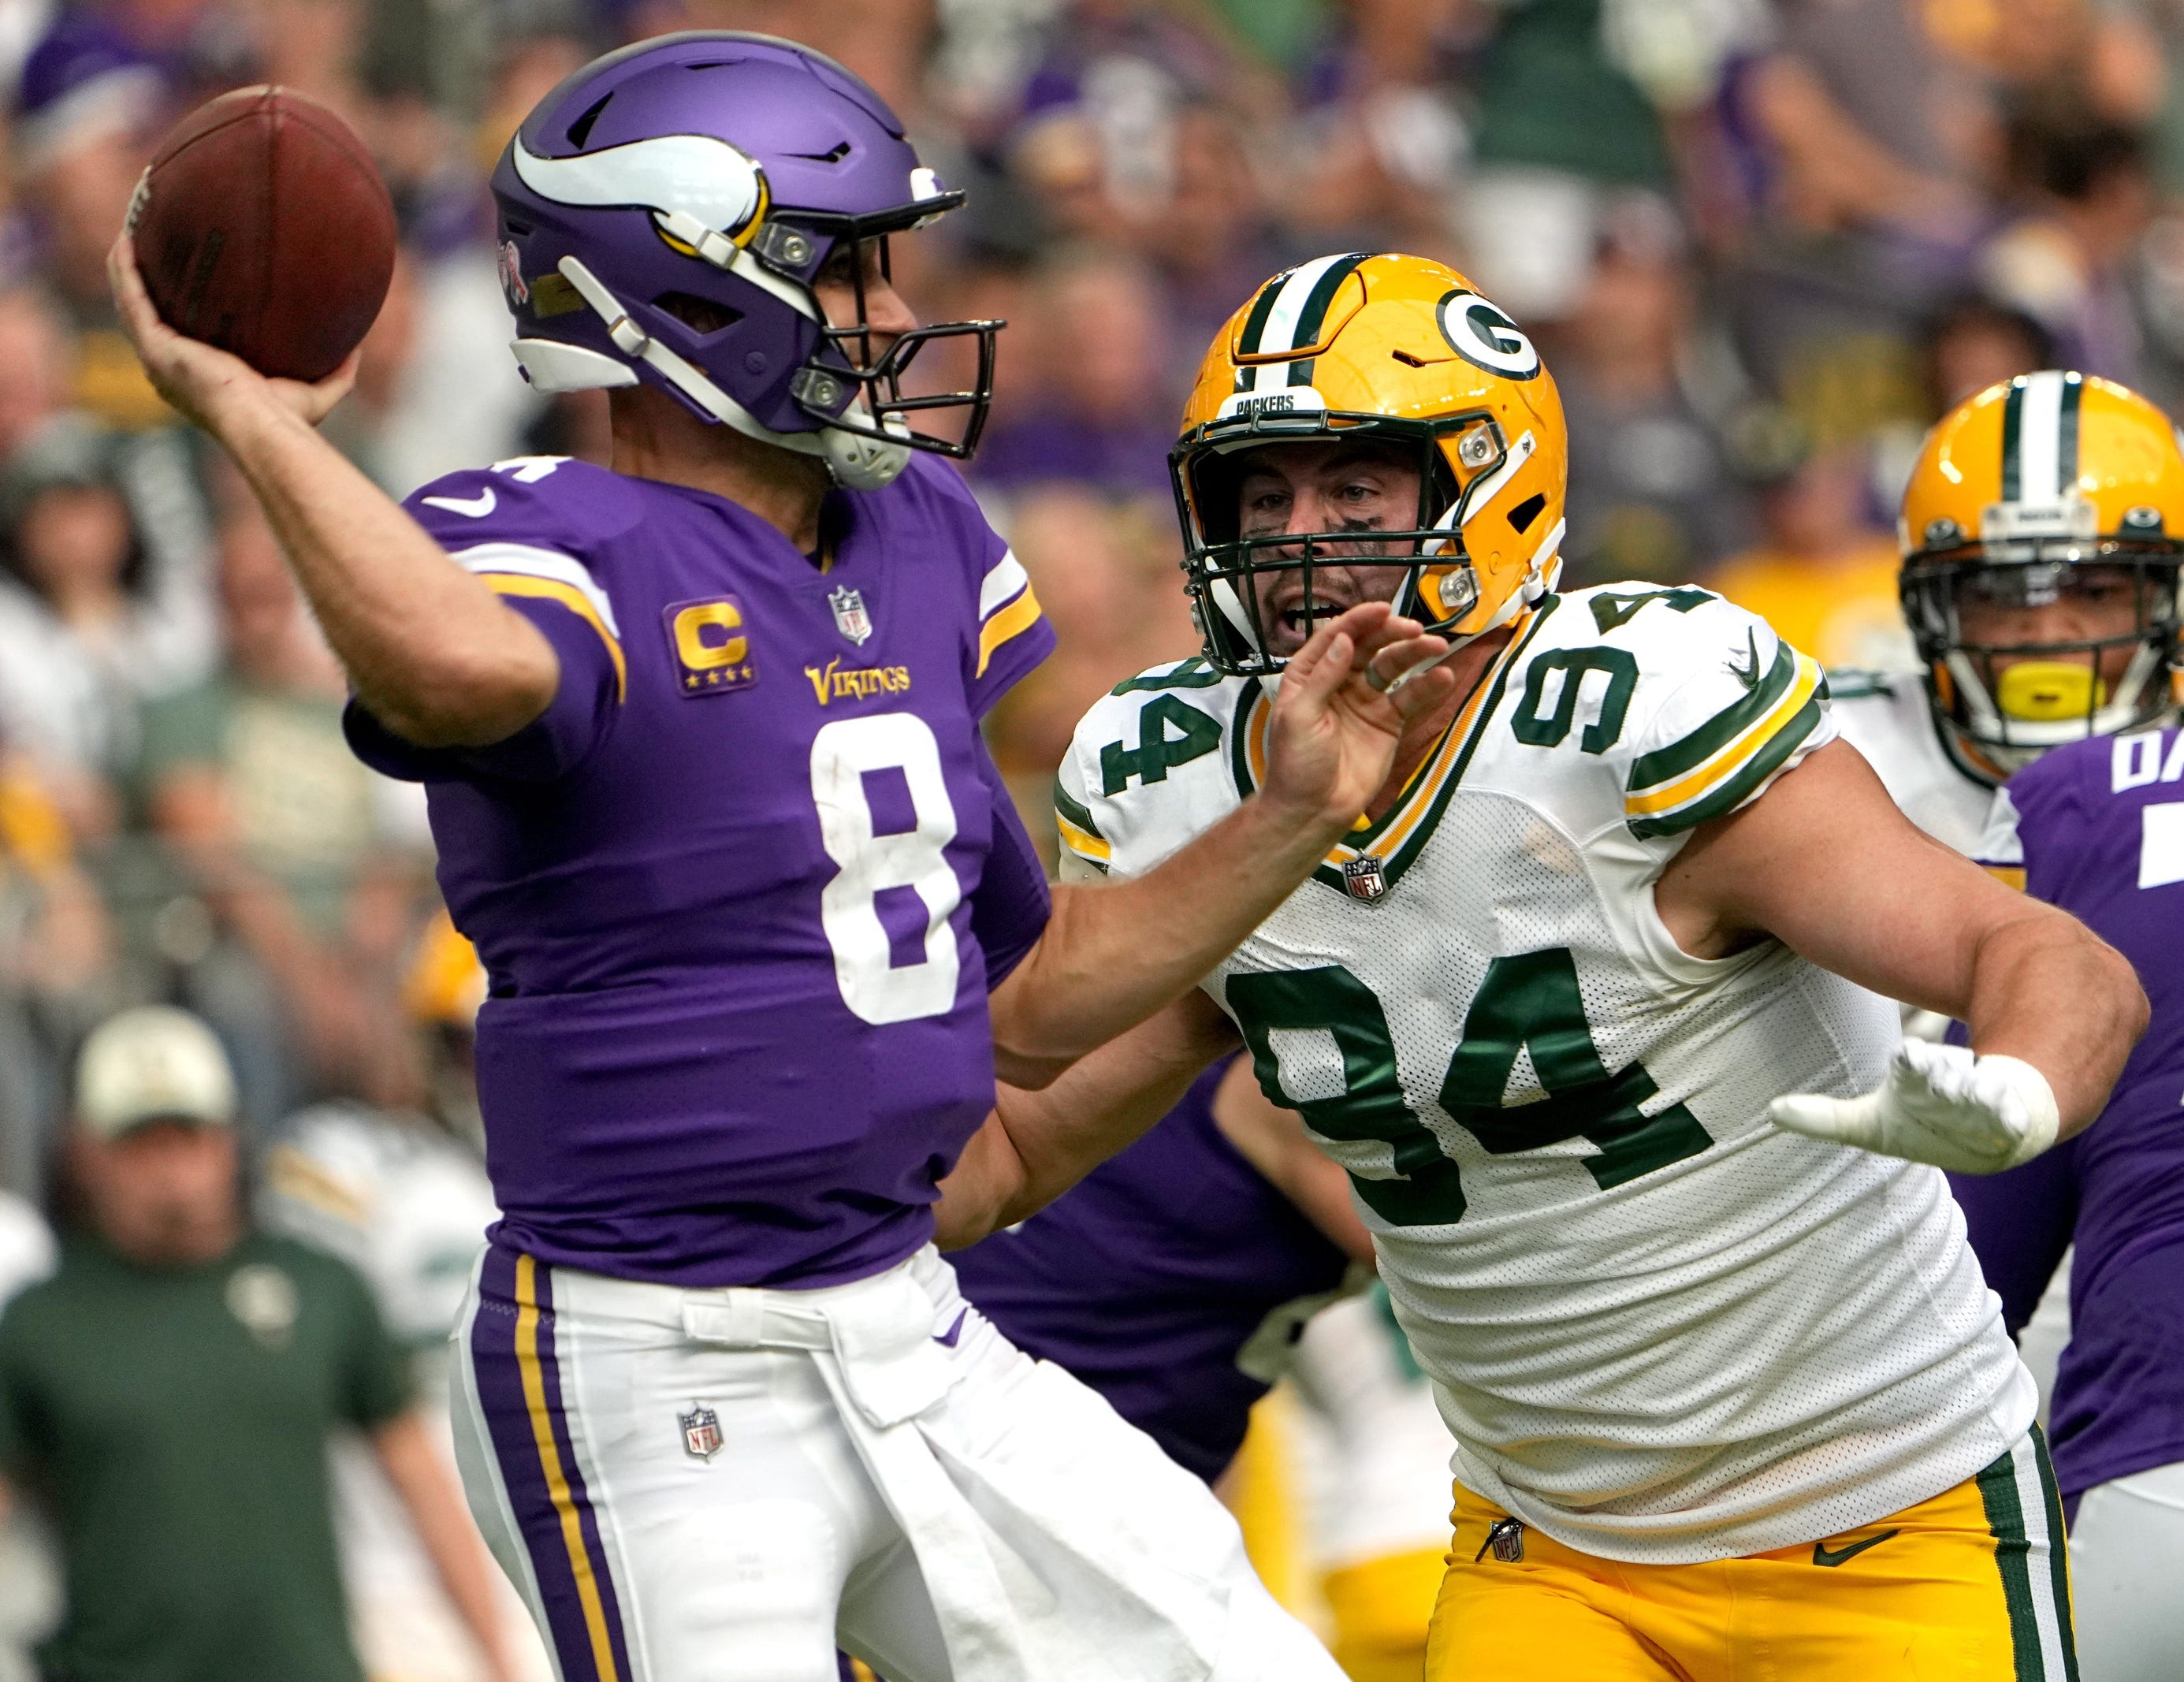 Green Bay Packers defensive end Dean Lowry (94) pressures Minnesota Vikings quarterback Kirk Cousins (8) during the first quarter of their game Sunday, September 11, 2022 at U.S. Bank Stadium in Minneapolis, Minn. © Mark Hoffman / Milwaukee Journal Sentinel / USA TODAY NETWORK